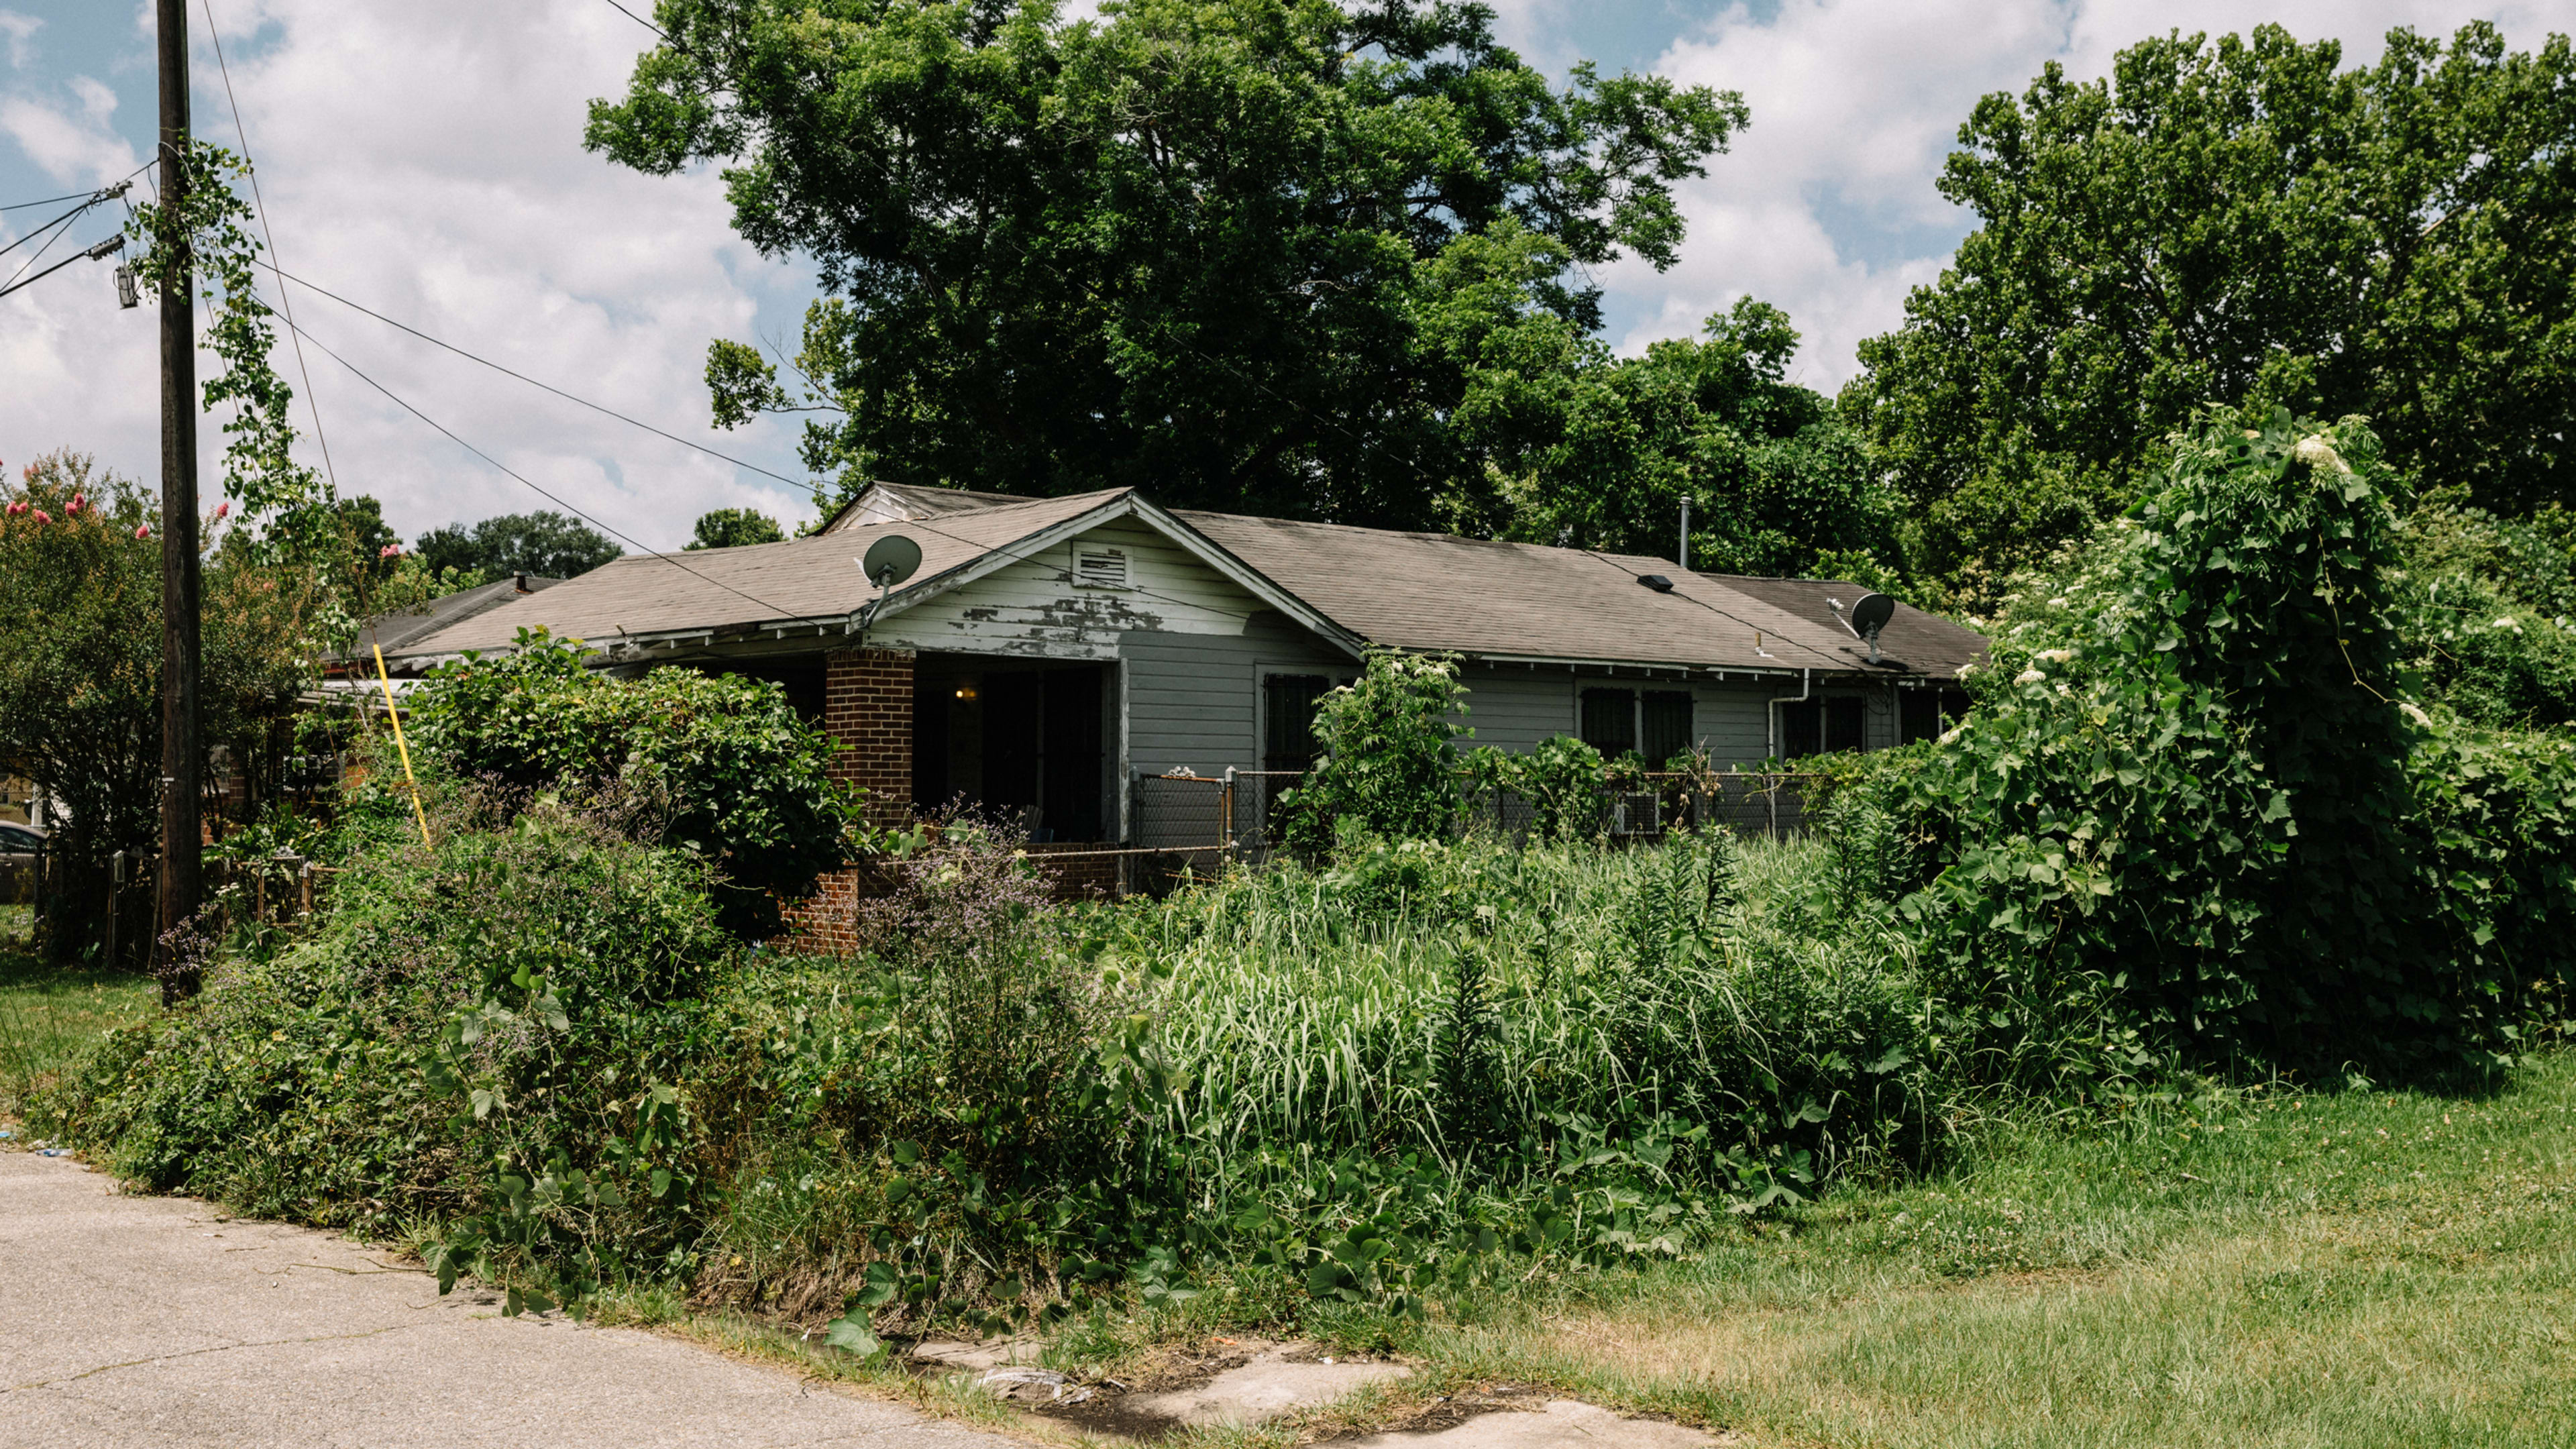 Blight is eating American cities. Here’s how Mobile, Alabama, stopped it